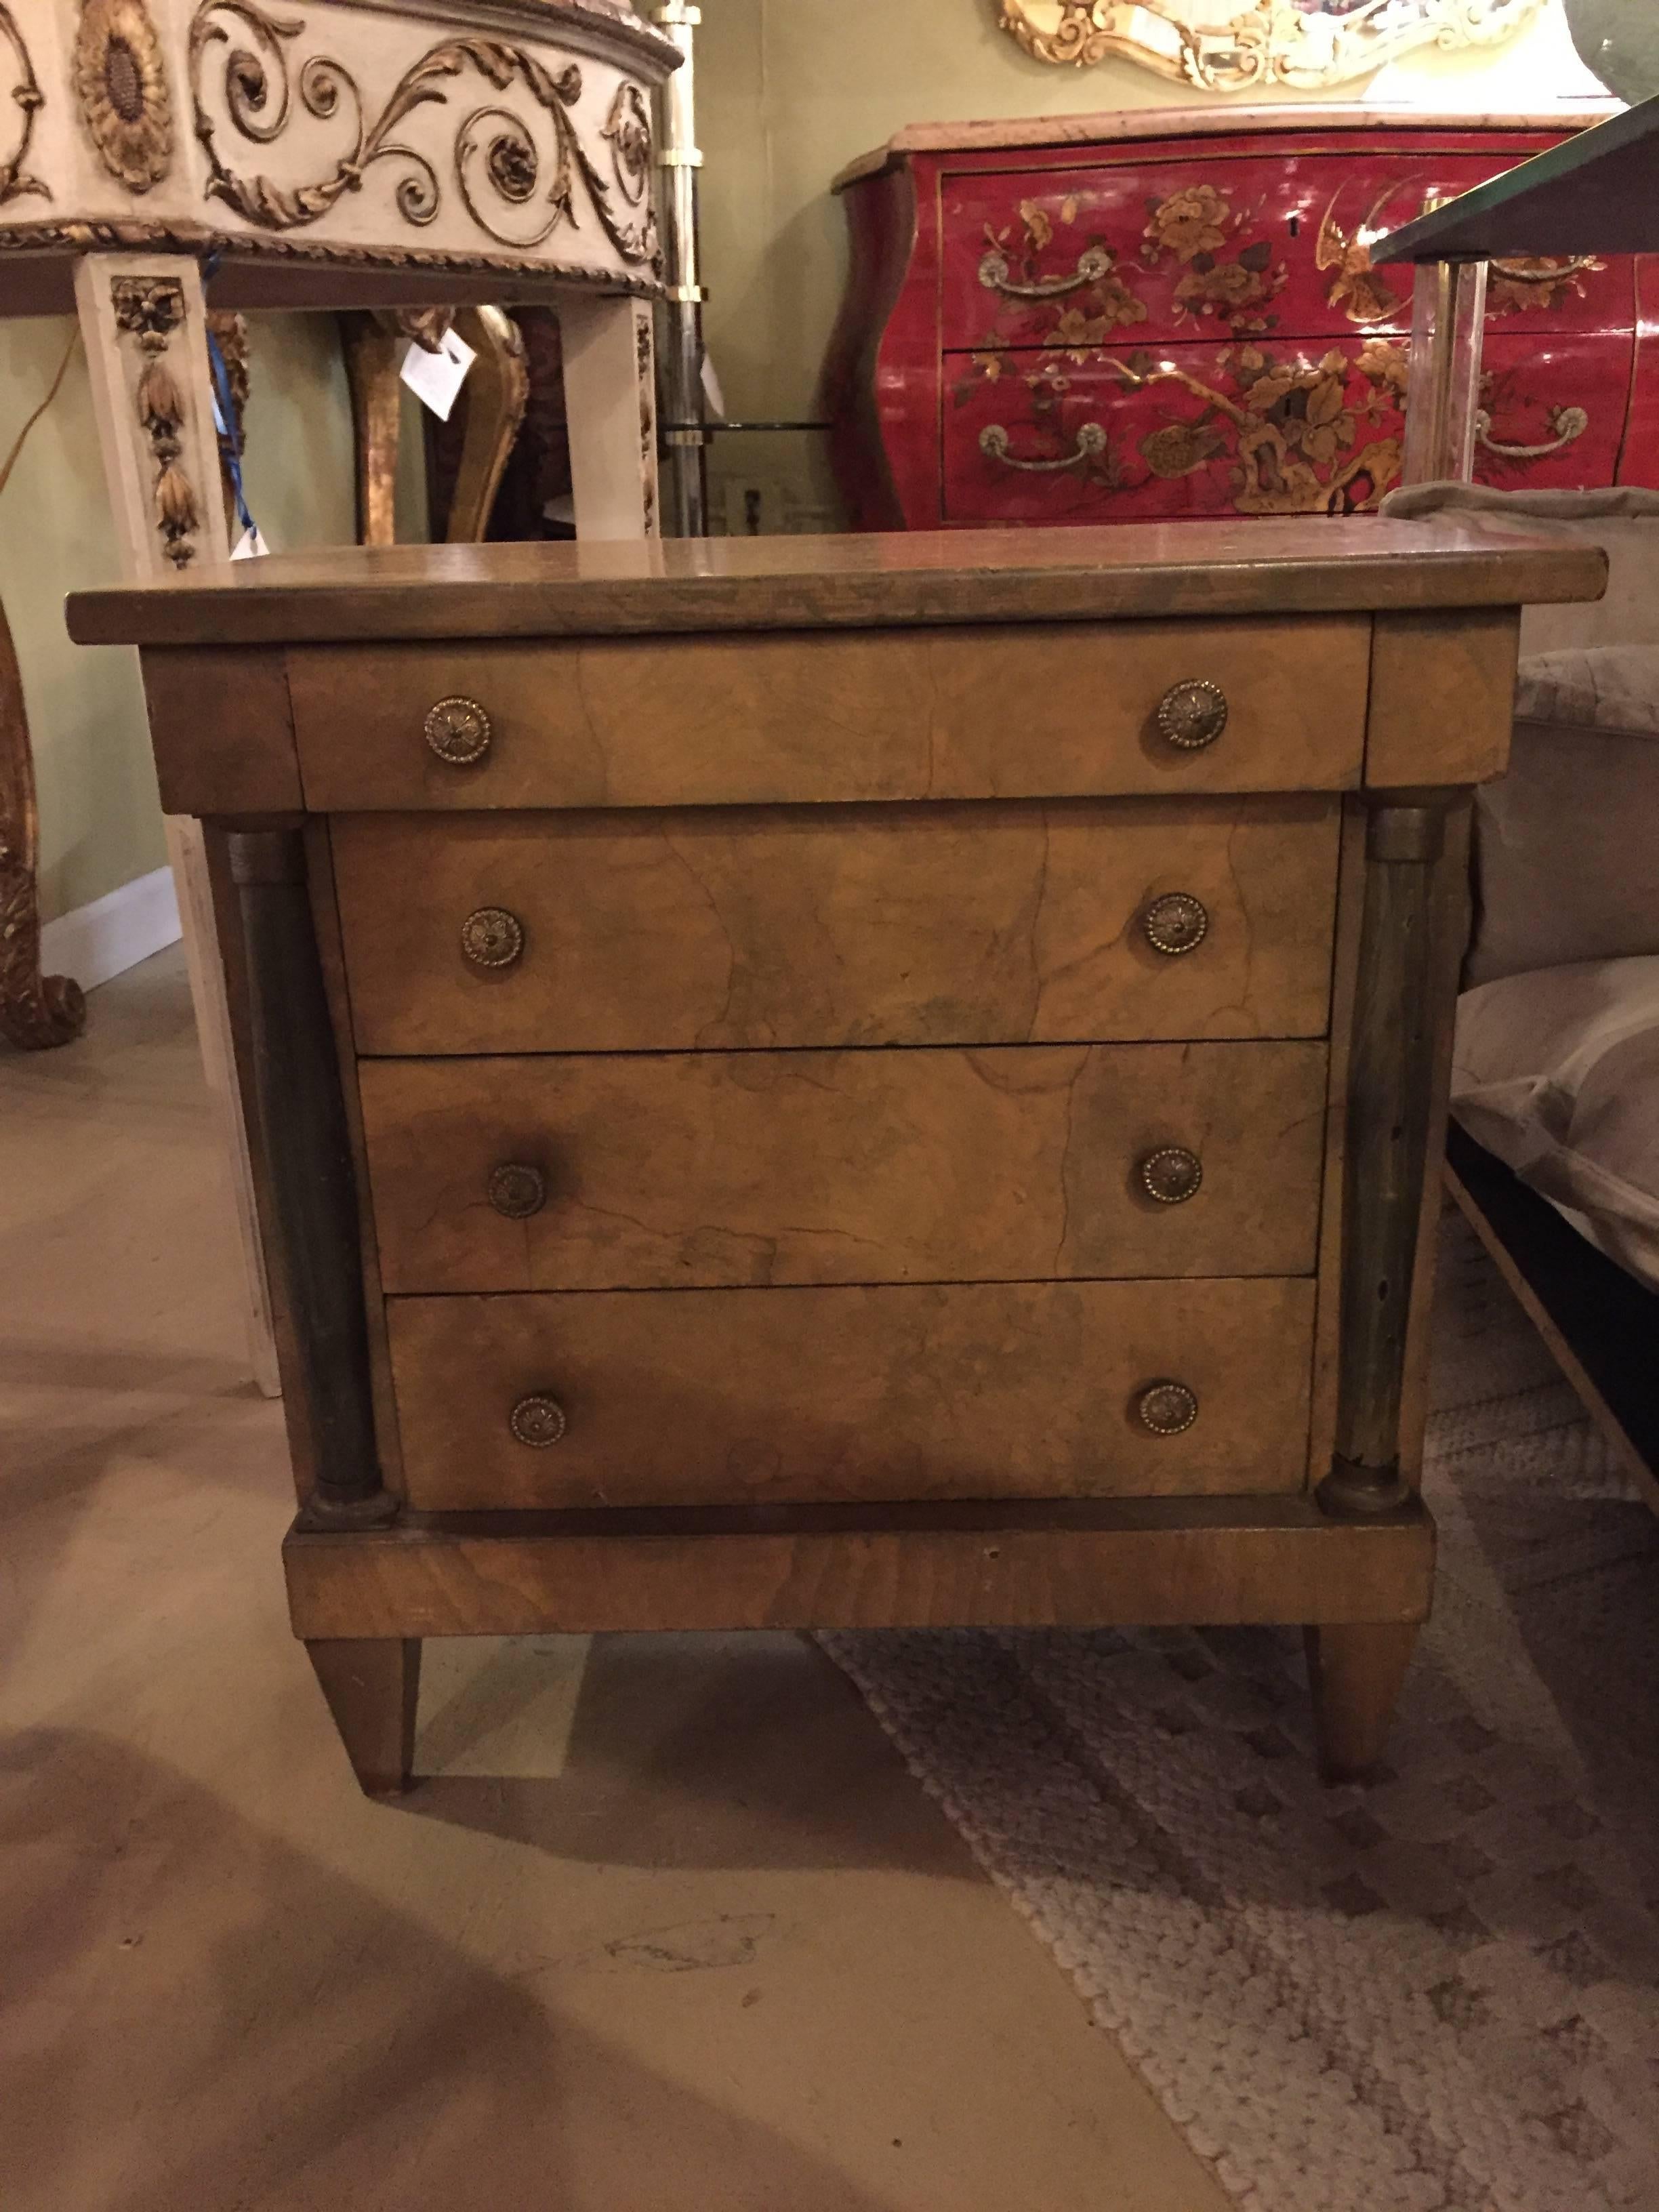 Diminutive chest of drawers salesmanship sampler. This fine handcrafted salesman sampler consists of four drawers flanked by ebonized columns having bronze caps and bottoms. Having its original worn burl finish this mini chest commode is sure to